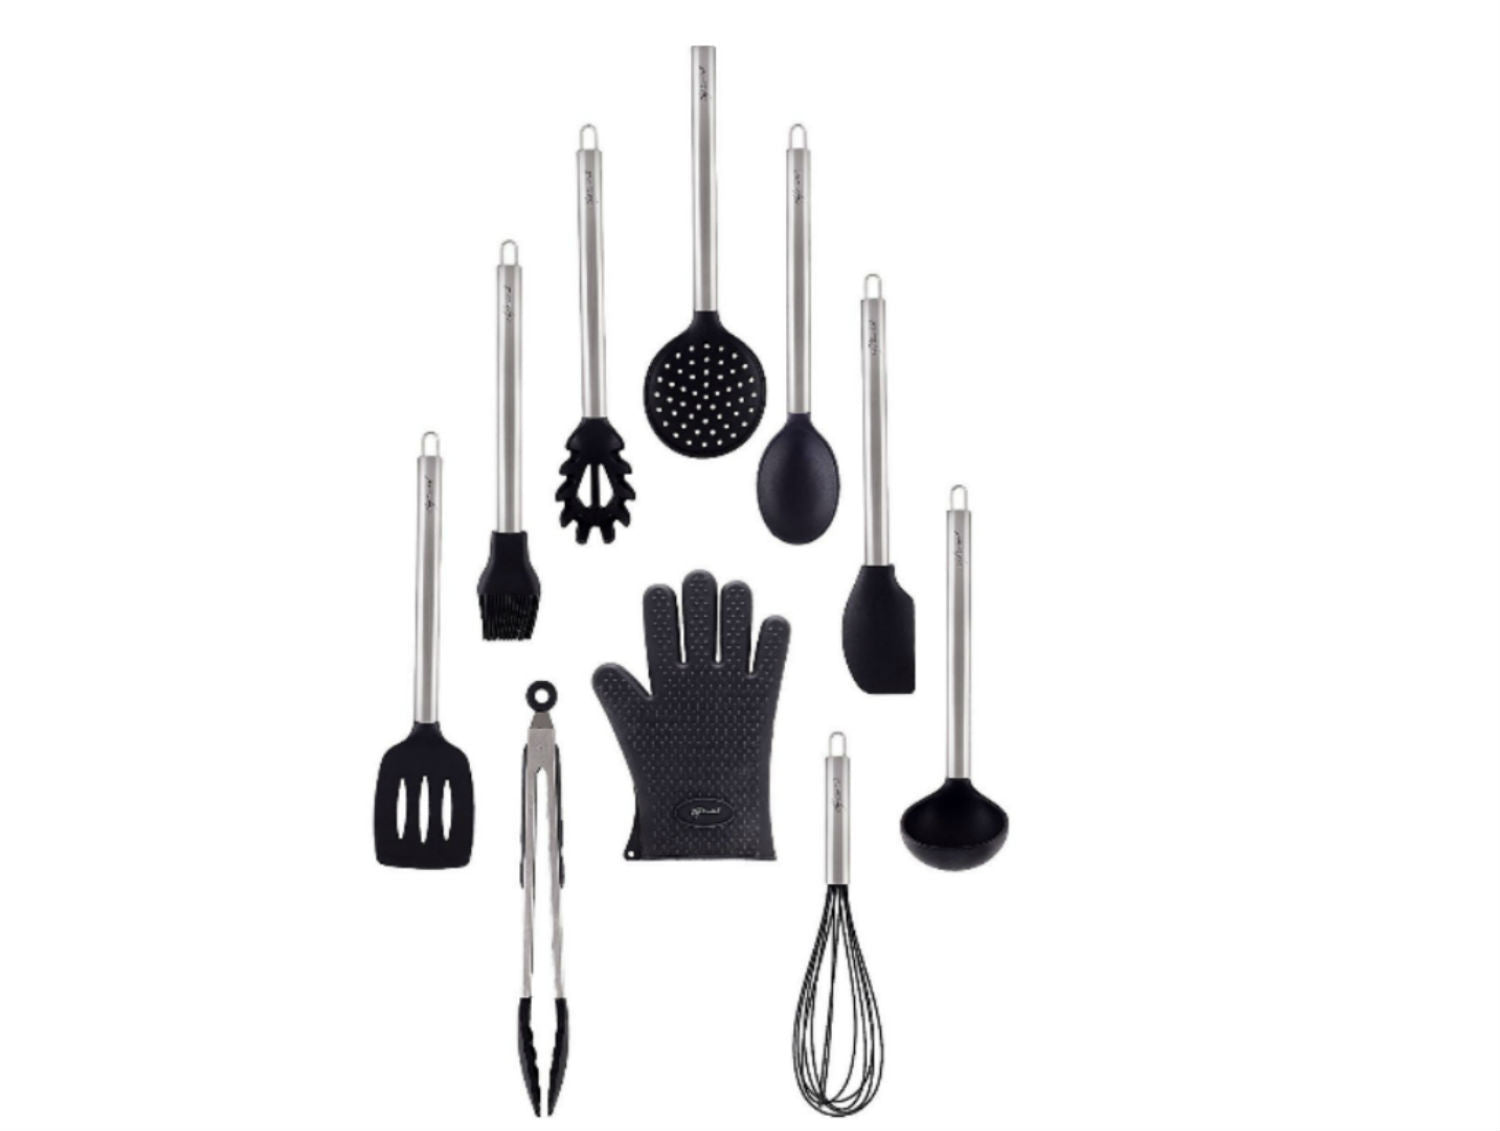 10 Pc Stainless Steel Kitchen Gadget Set with Soft Touch Handles